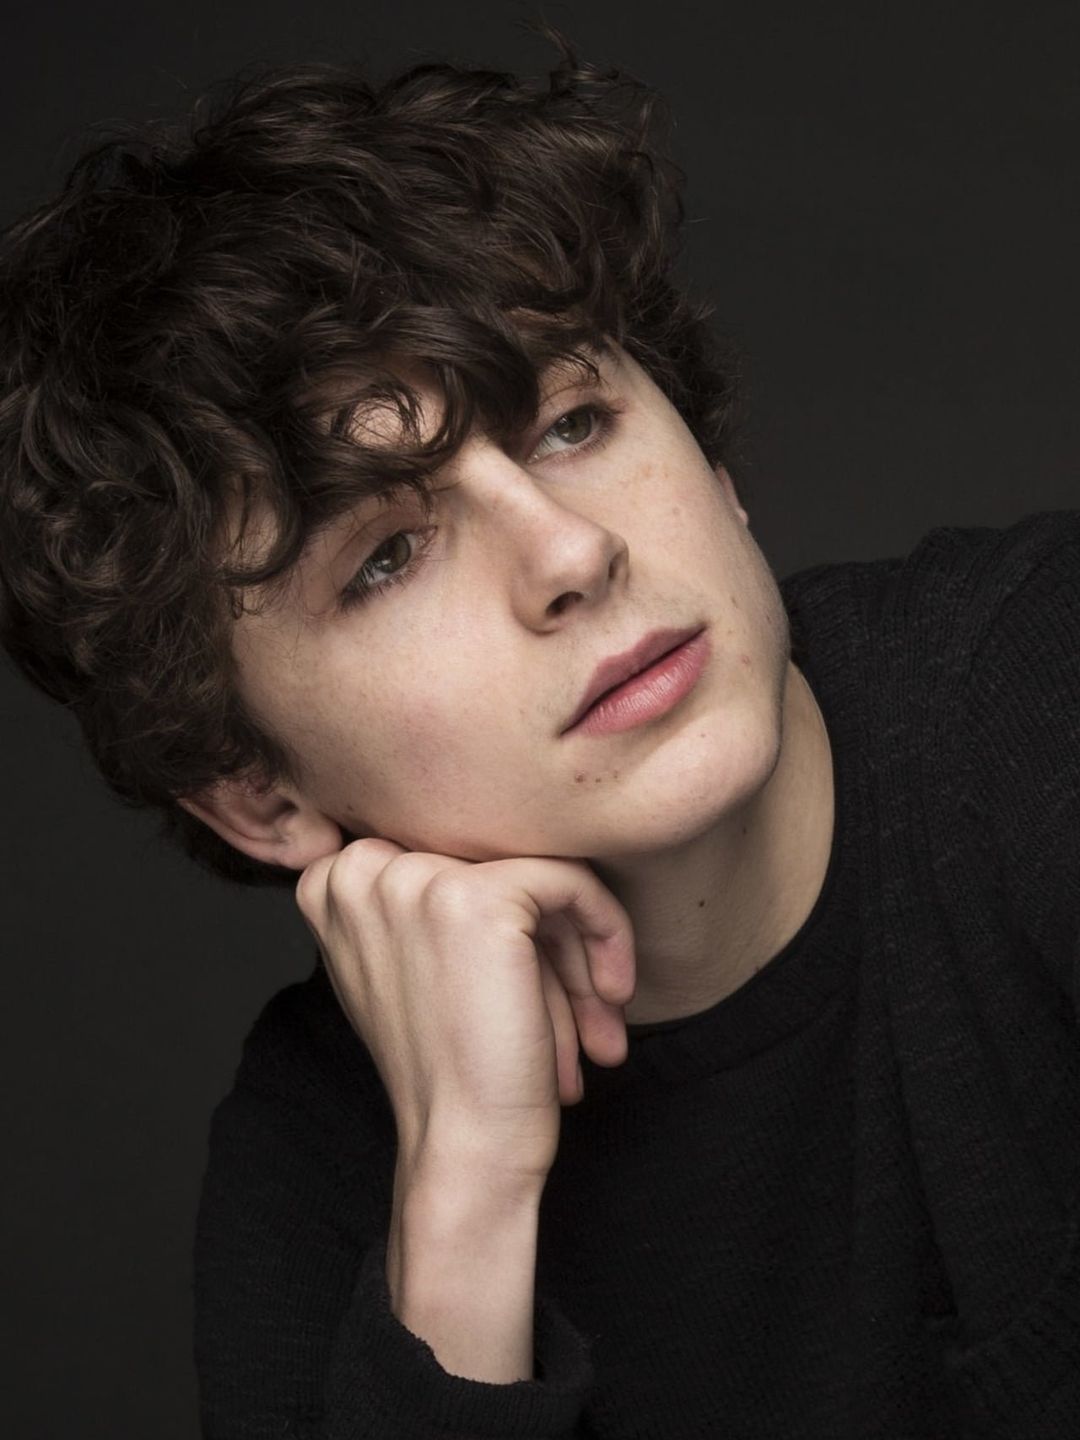 Timothee Chalamet does he have a wife